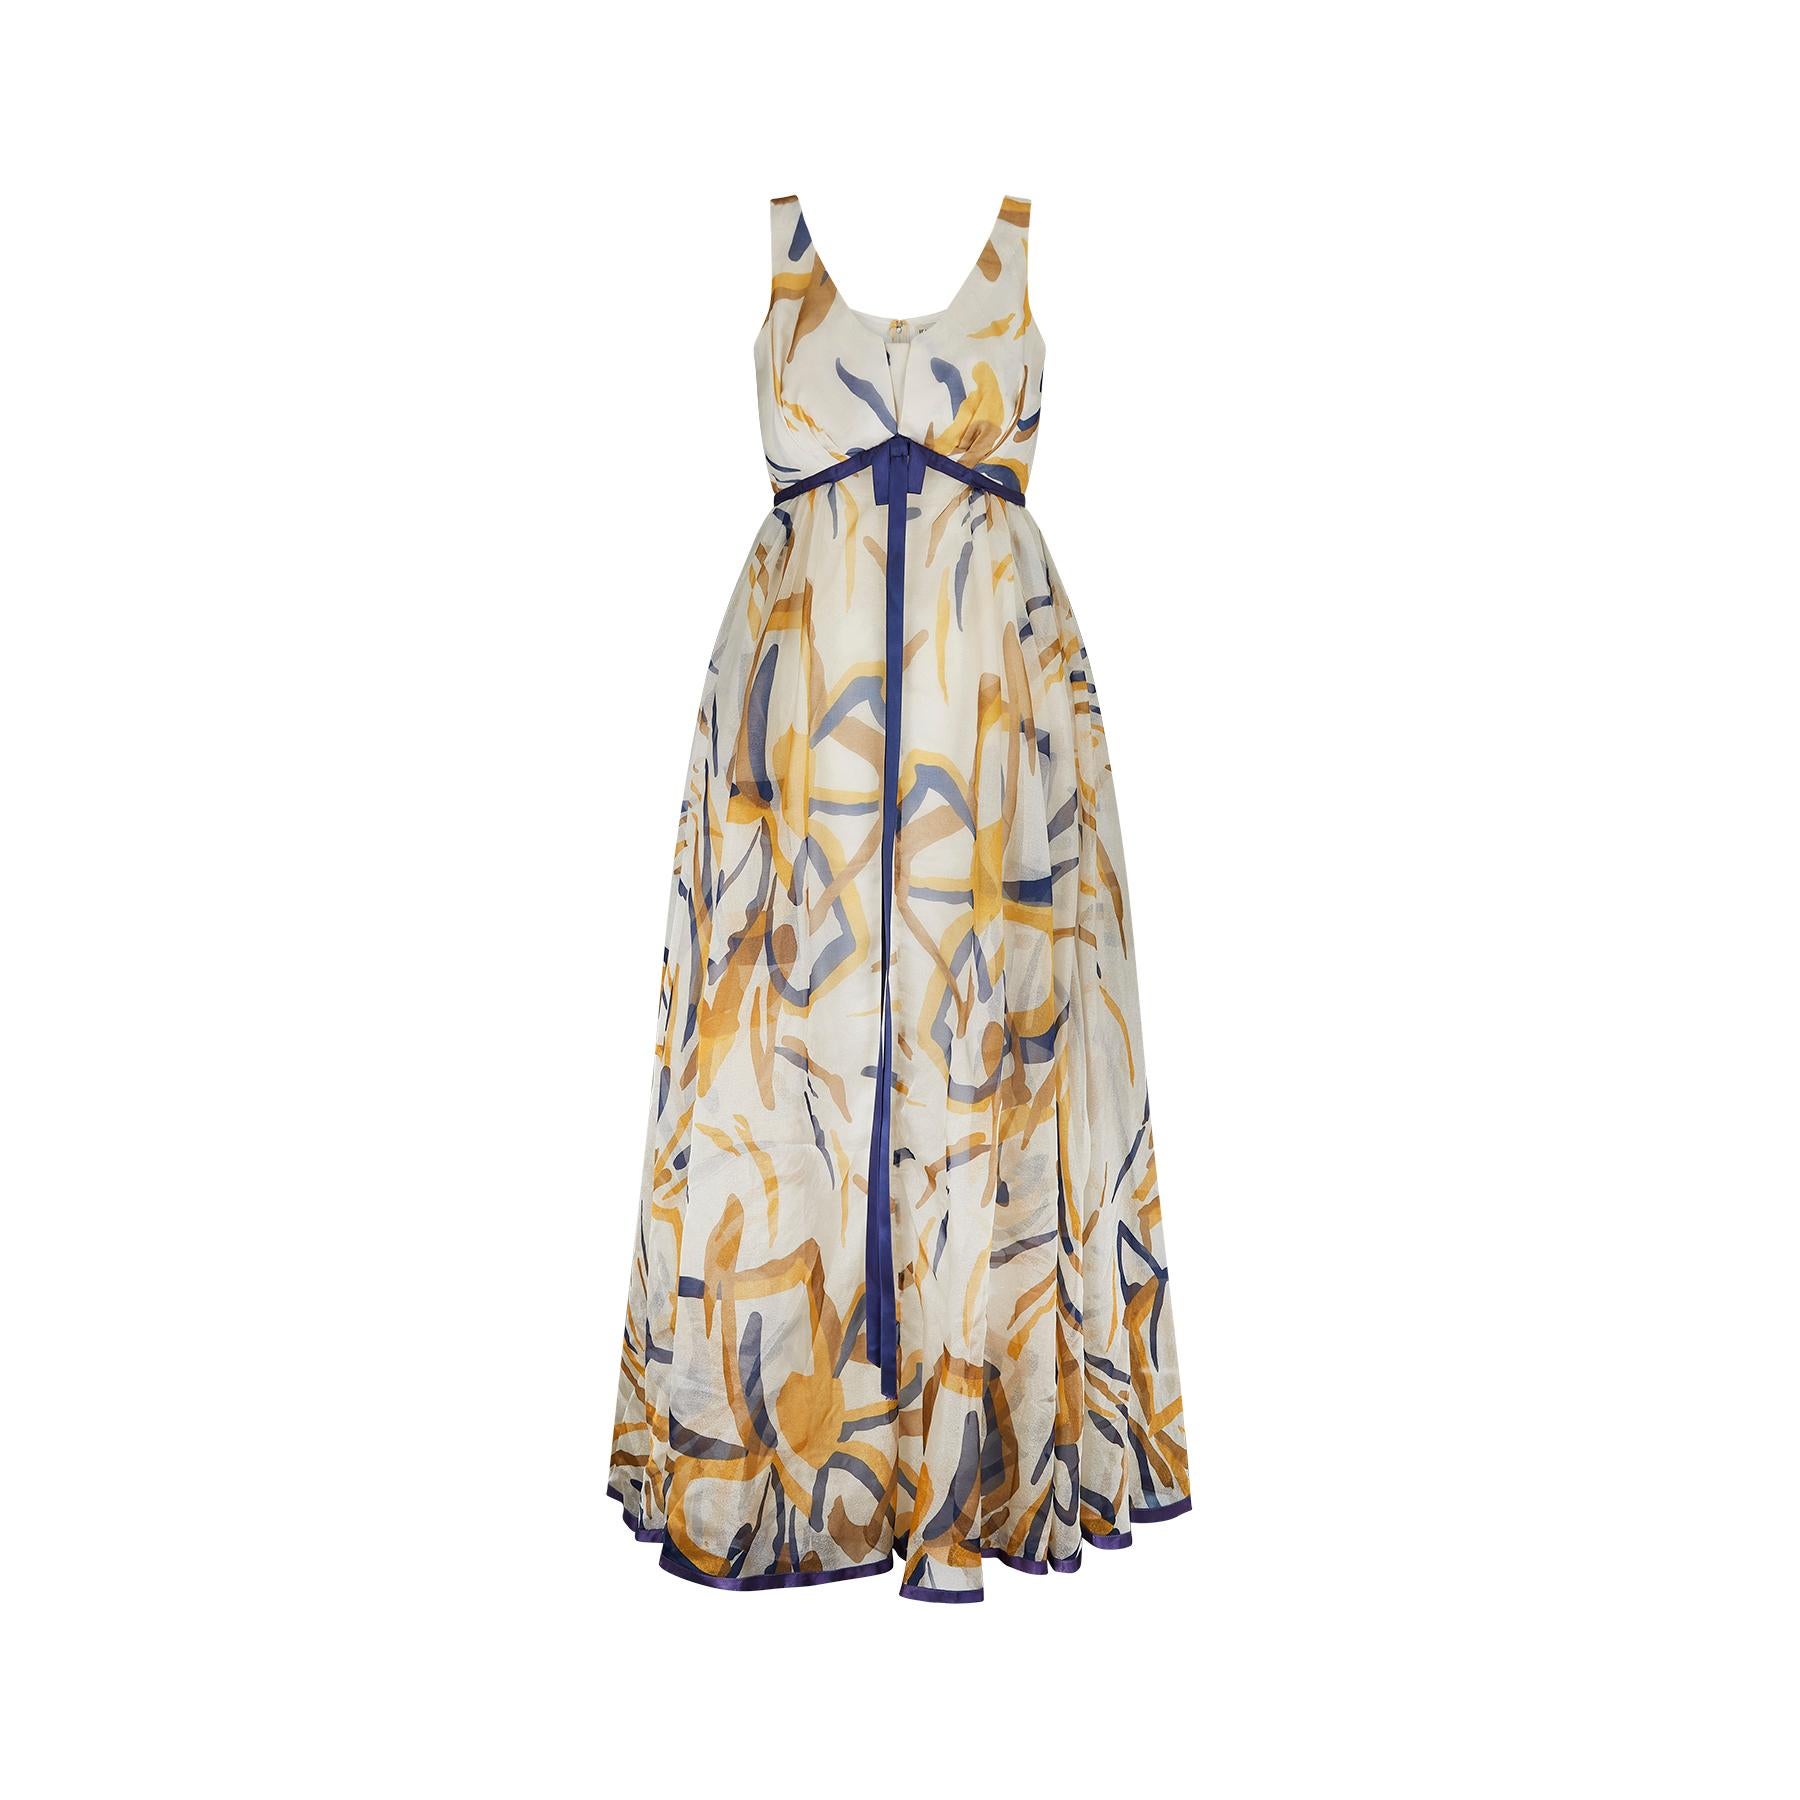 We love the colour combination on this 1960s Jean Allen maxi dress.  The print mixes warm golden highlights together with navy blue accents on cream in a painterly, abstract pattern. The dress has an inverted empire line and scoop neck from which